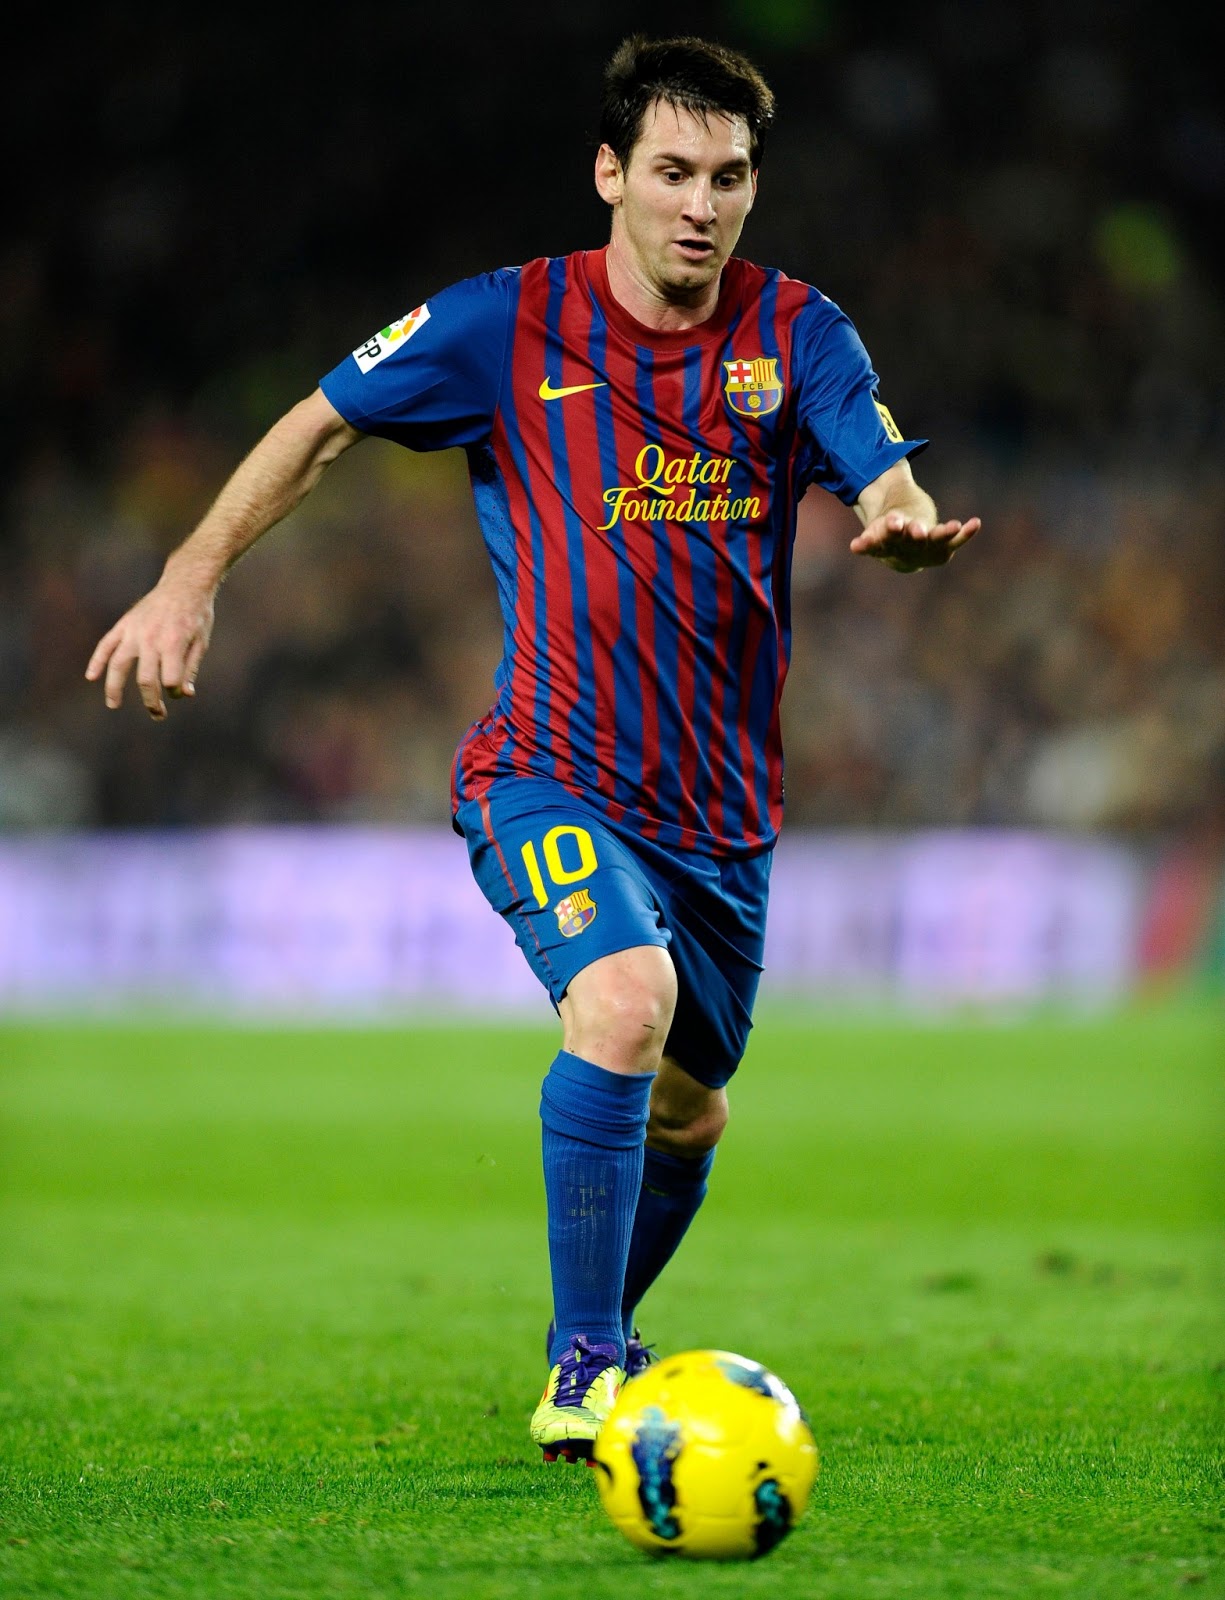 Lionel Messi Soccer Player